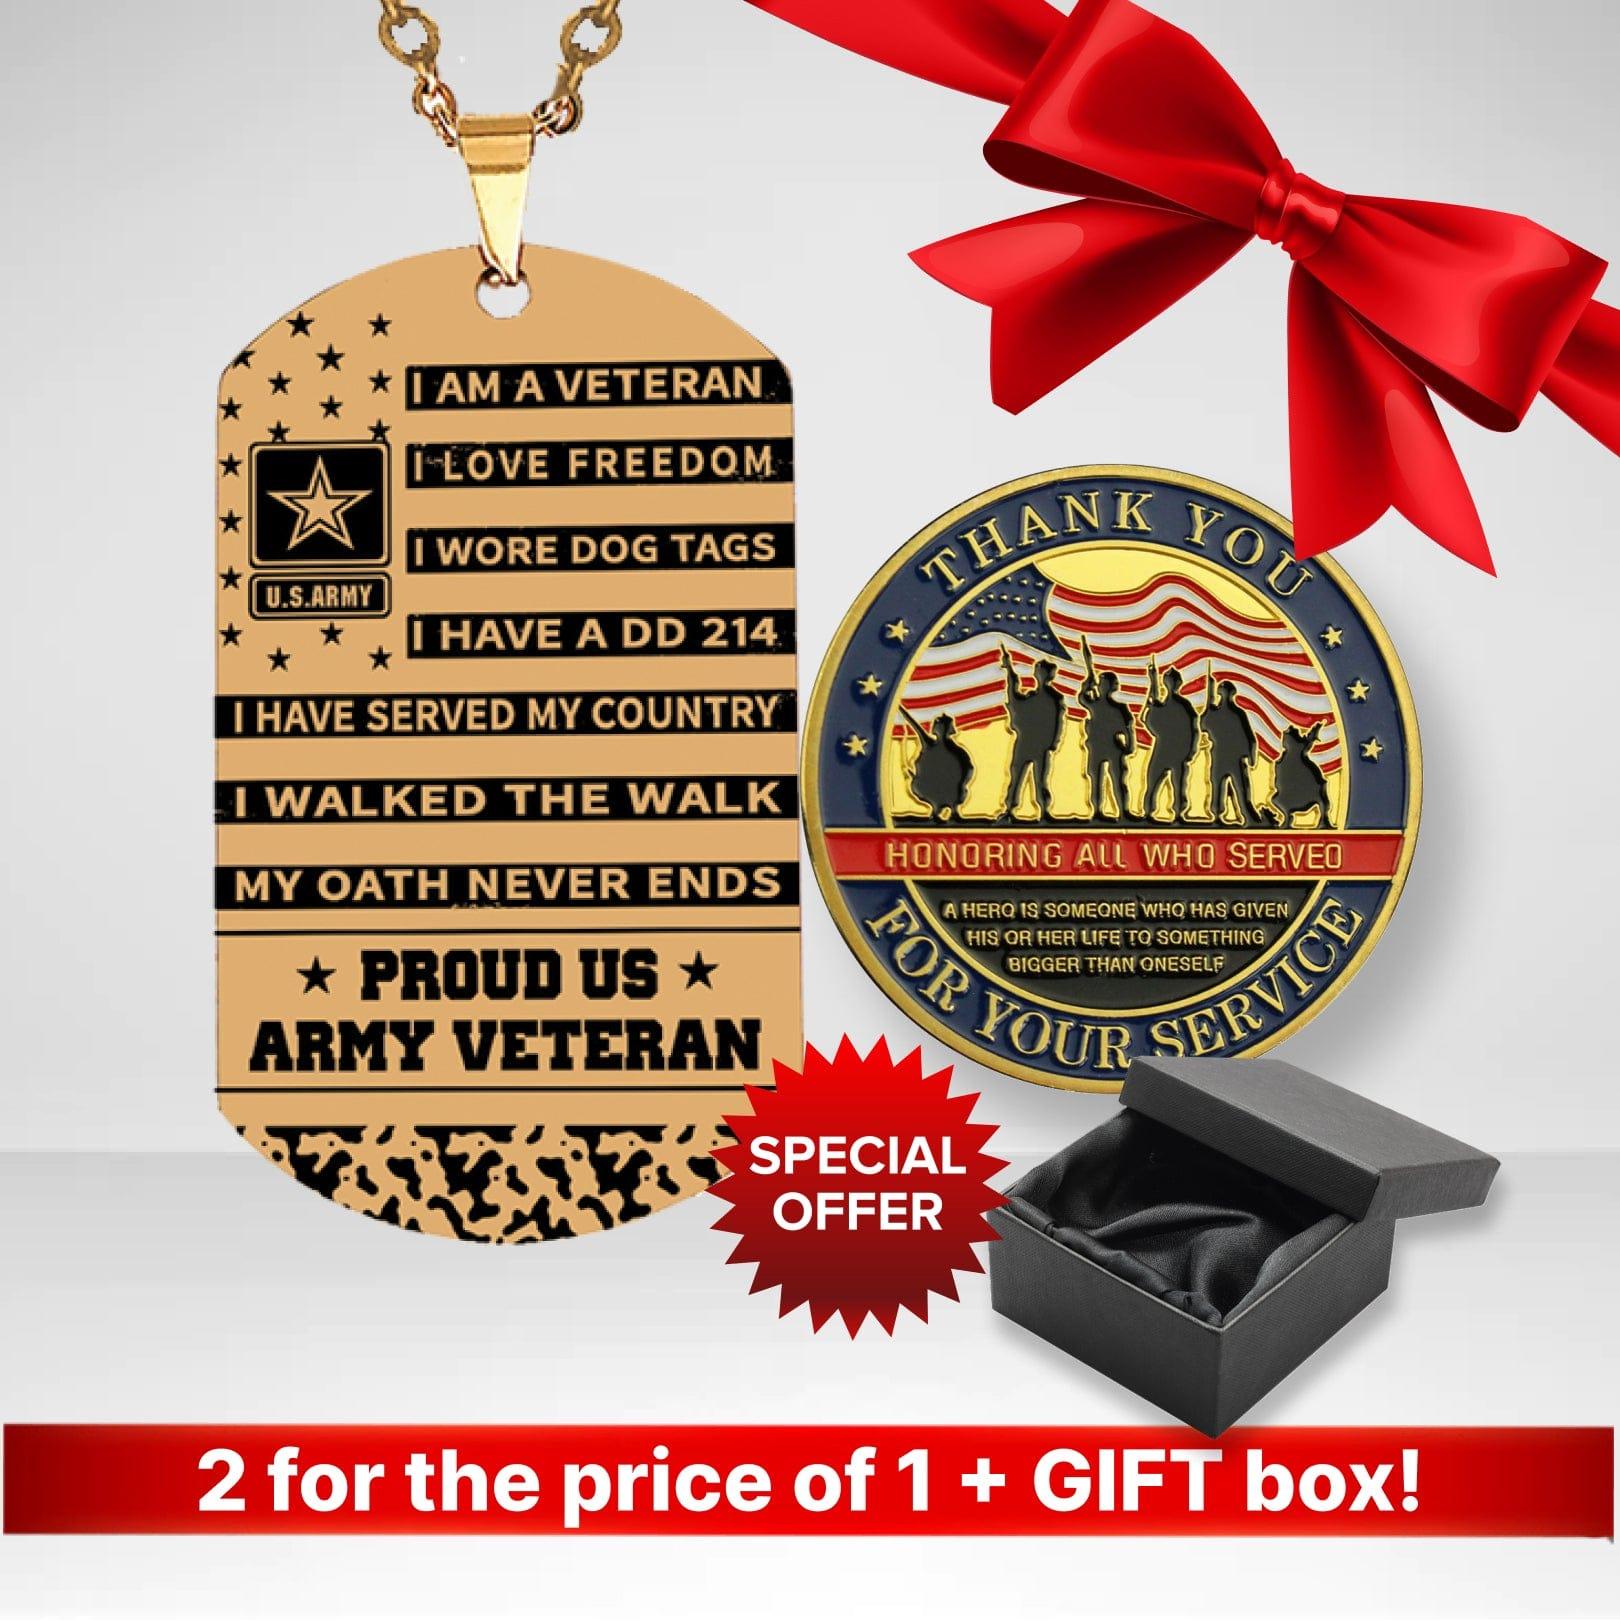 does every soldier get dog tags